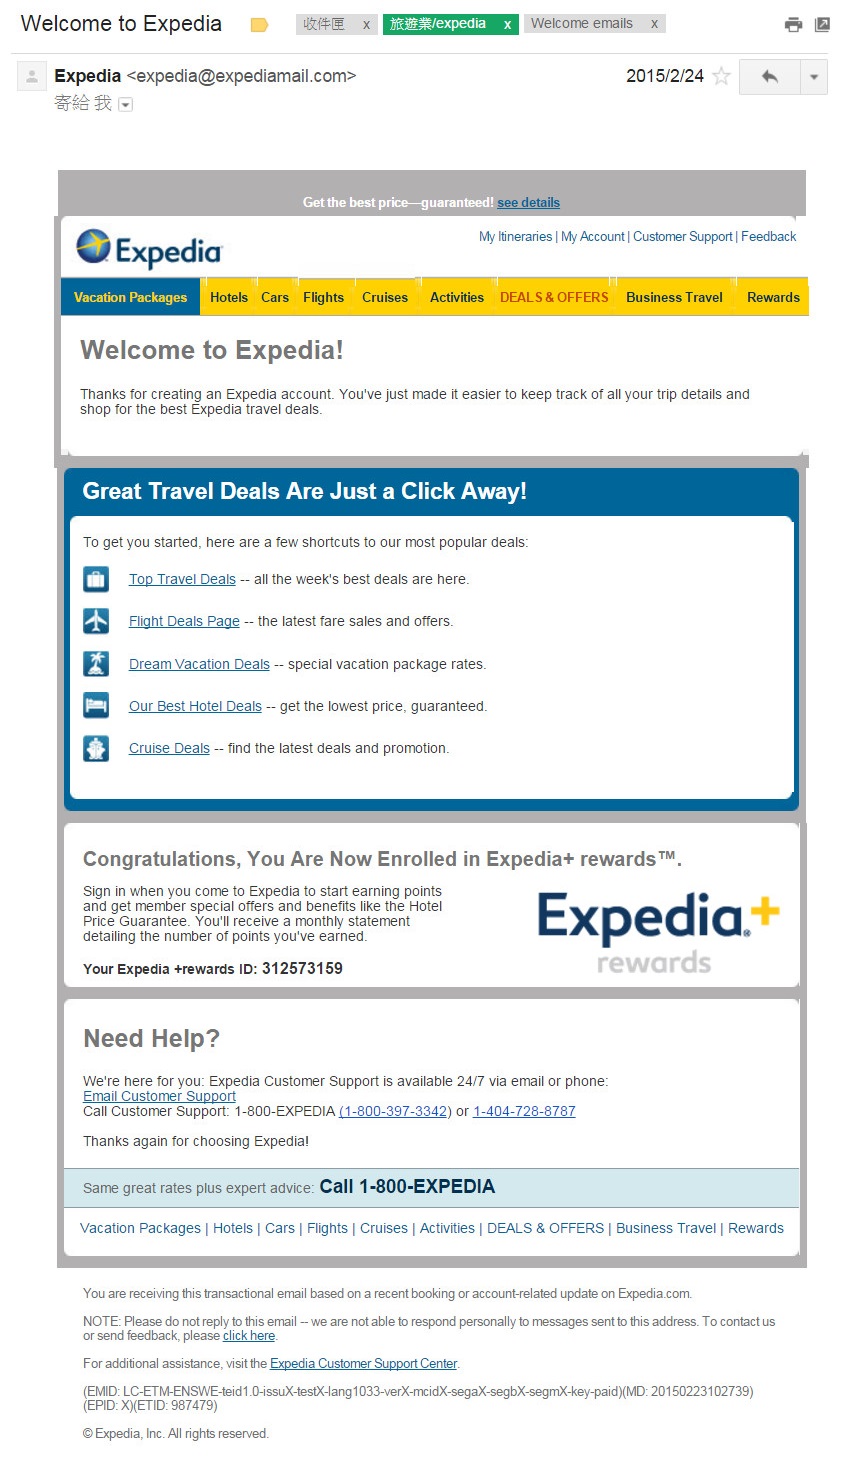 Expedia_welcome_email